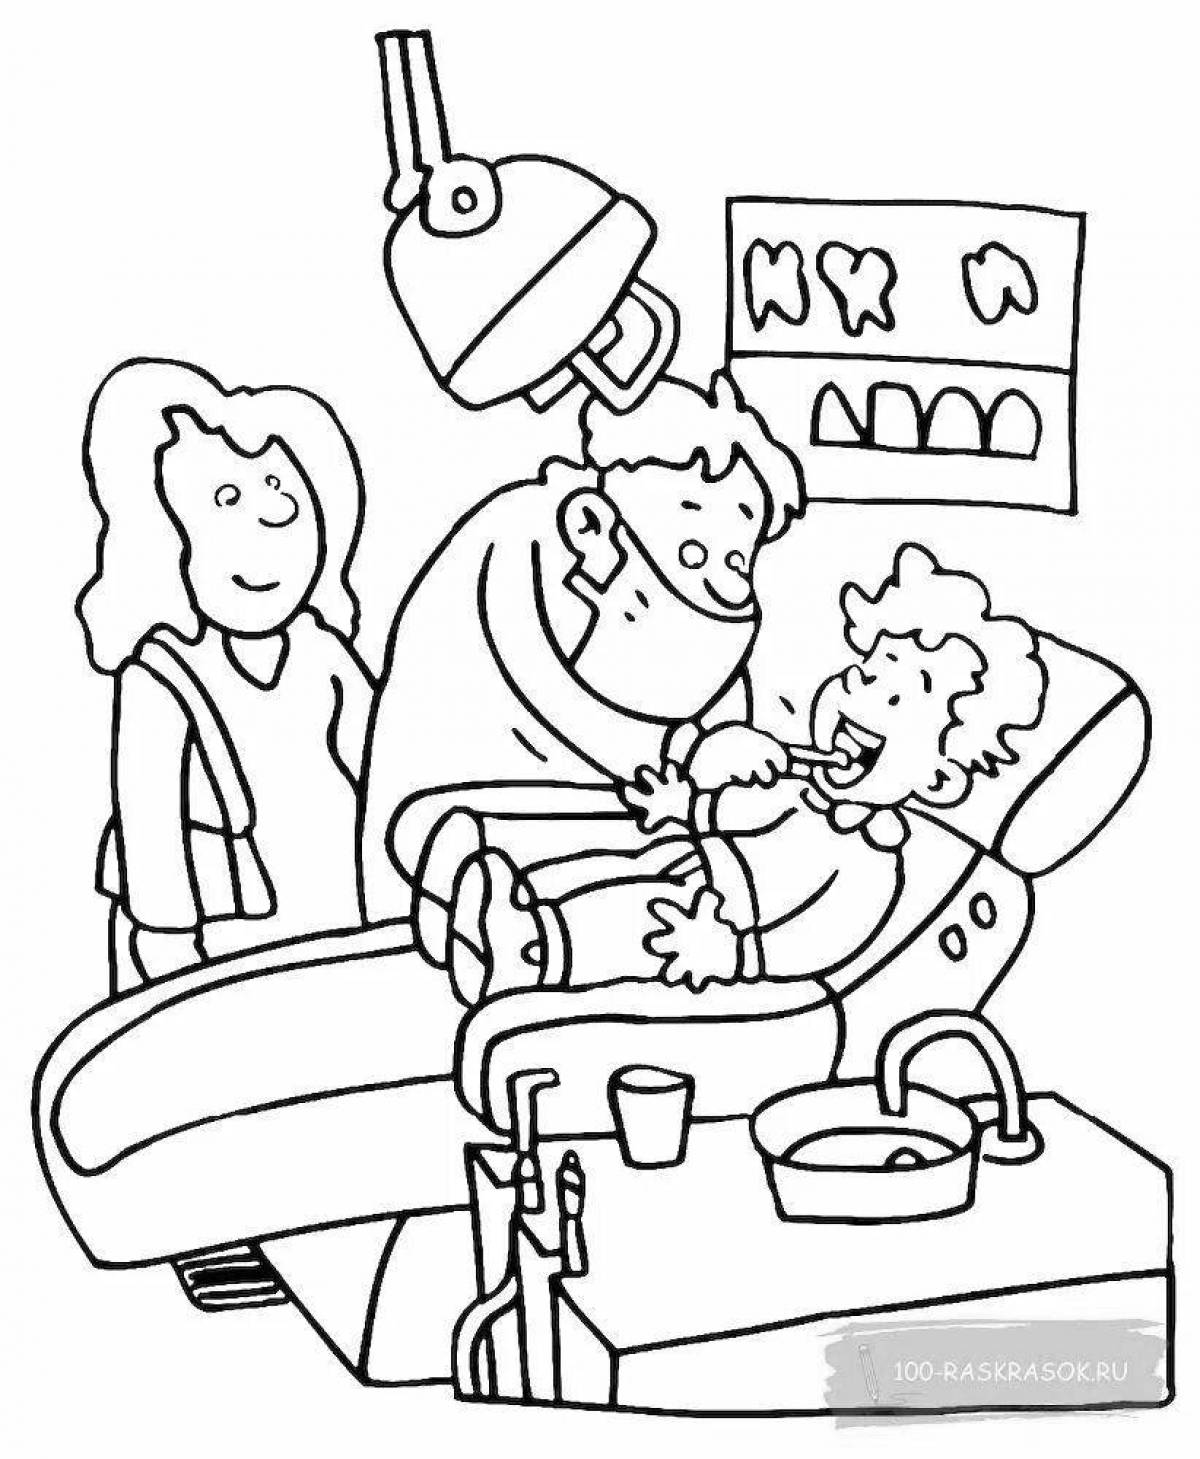 Colorful occupations coloring pages for 7-9 year olds